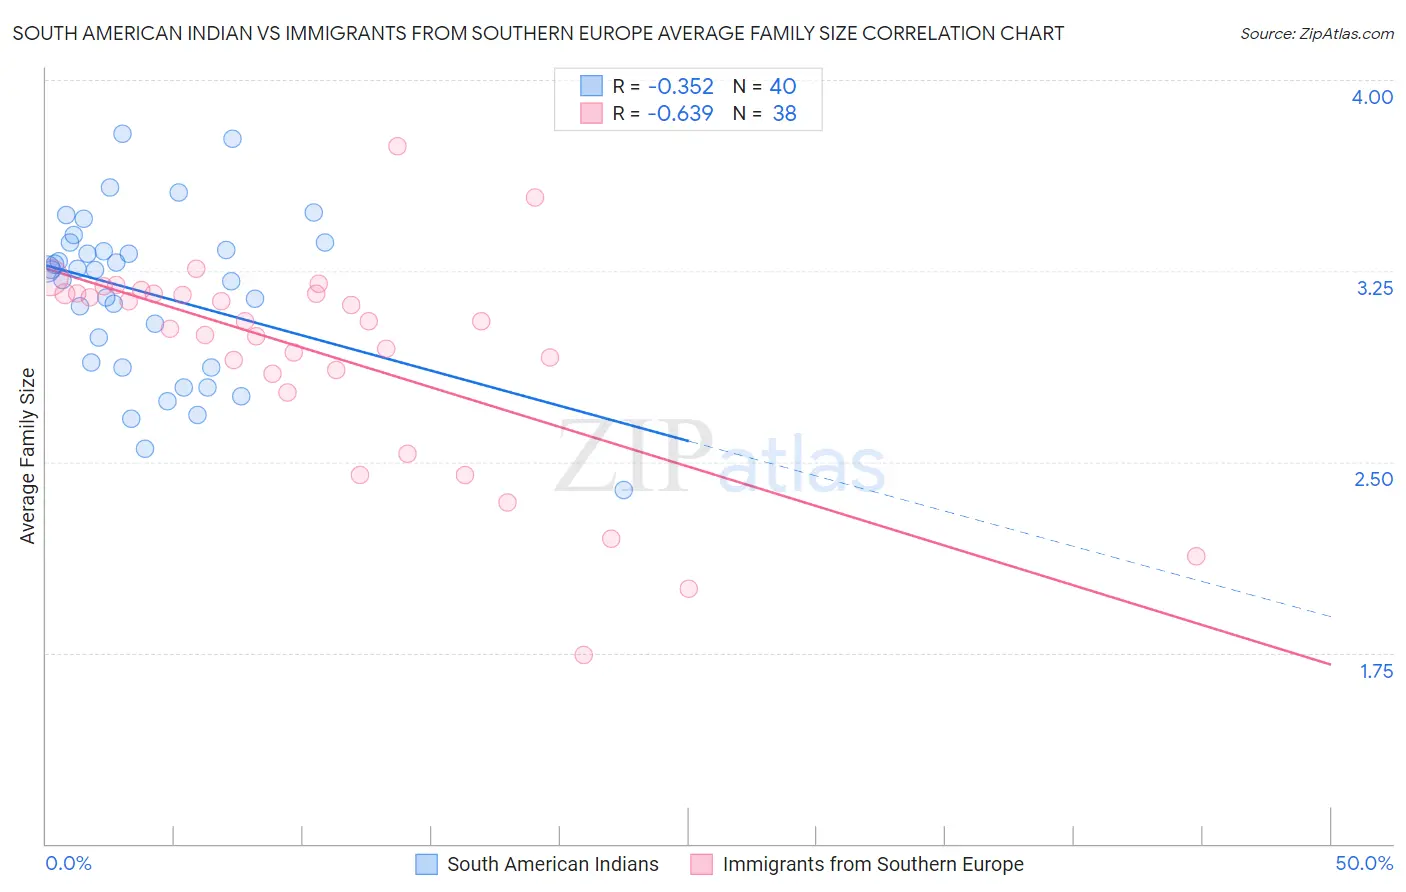 South American Indian vs Immigrants from Southern Europe Average Family Size